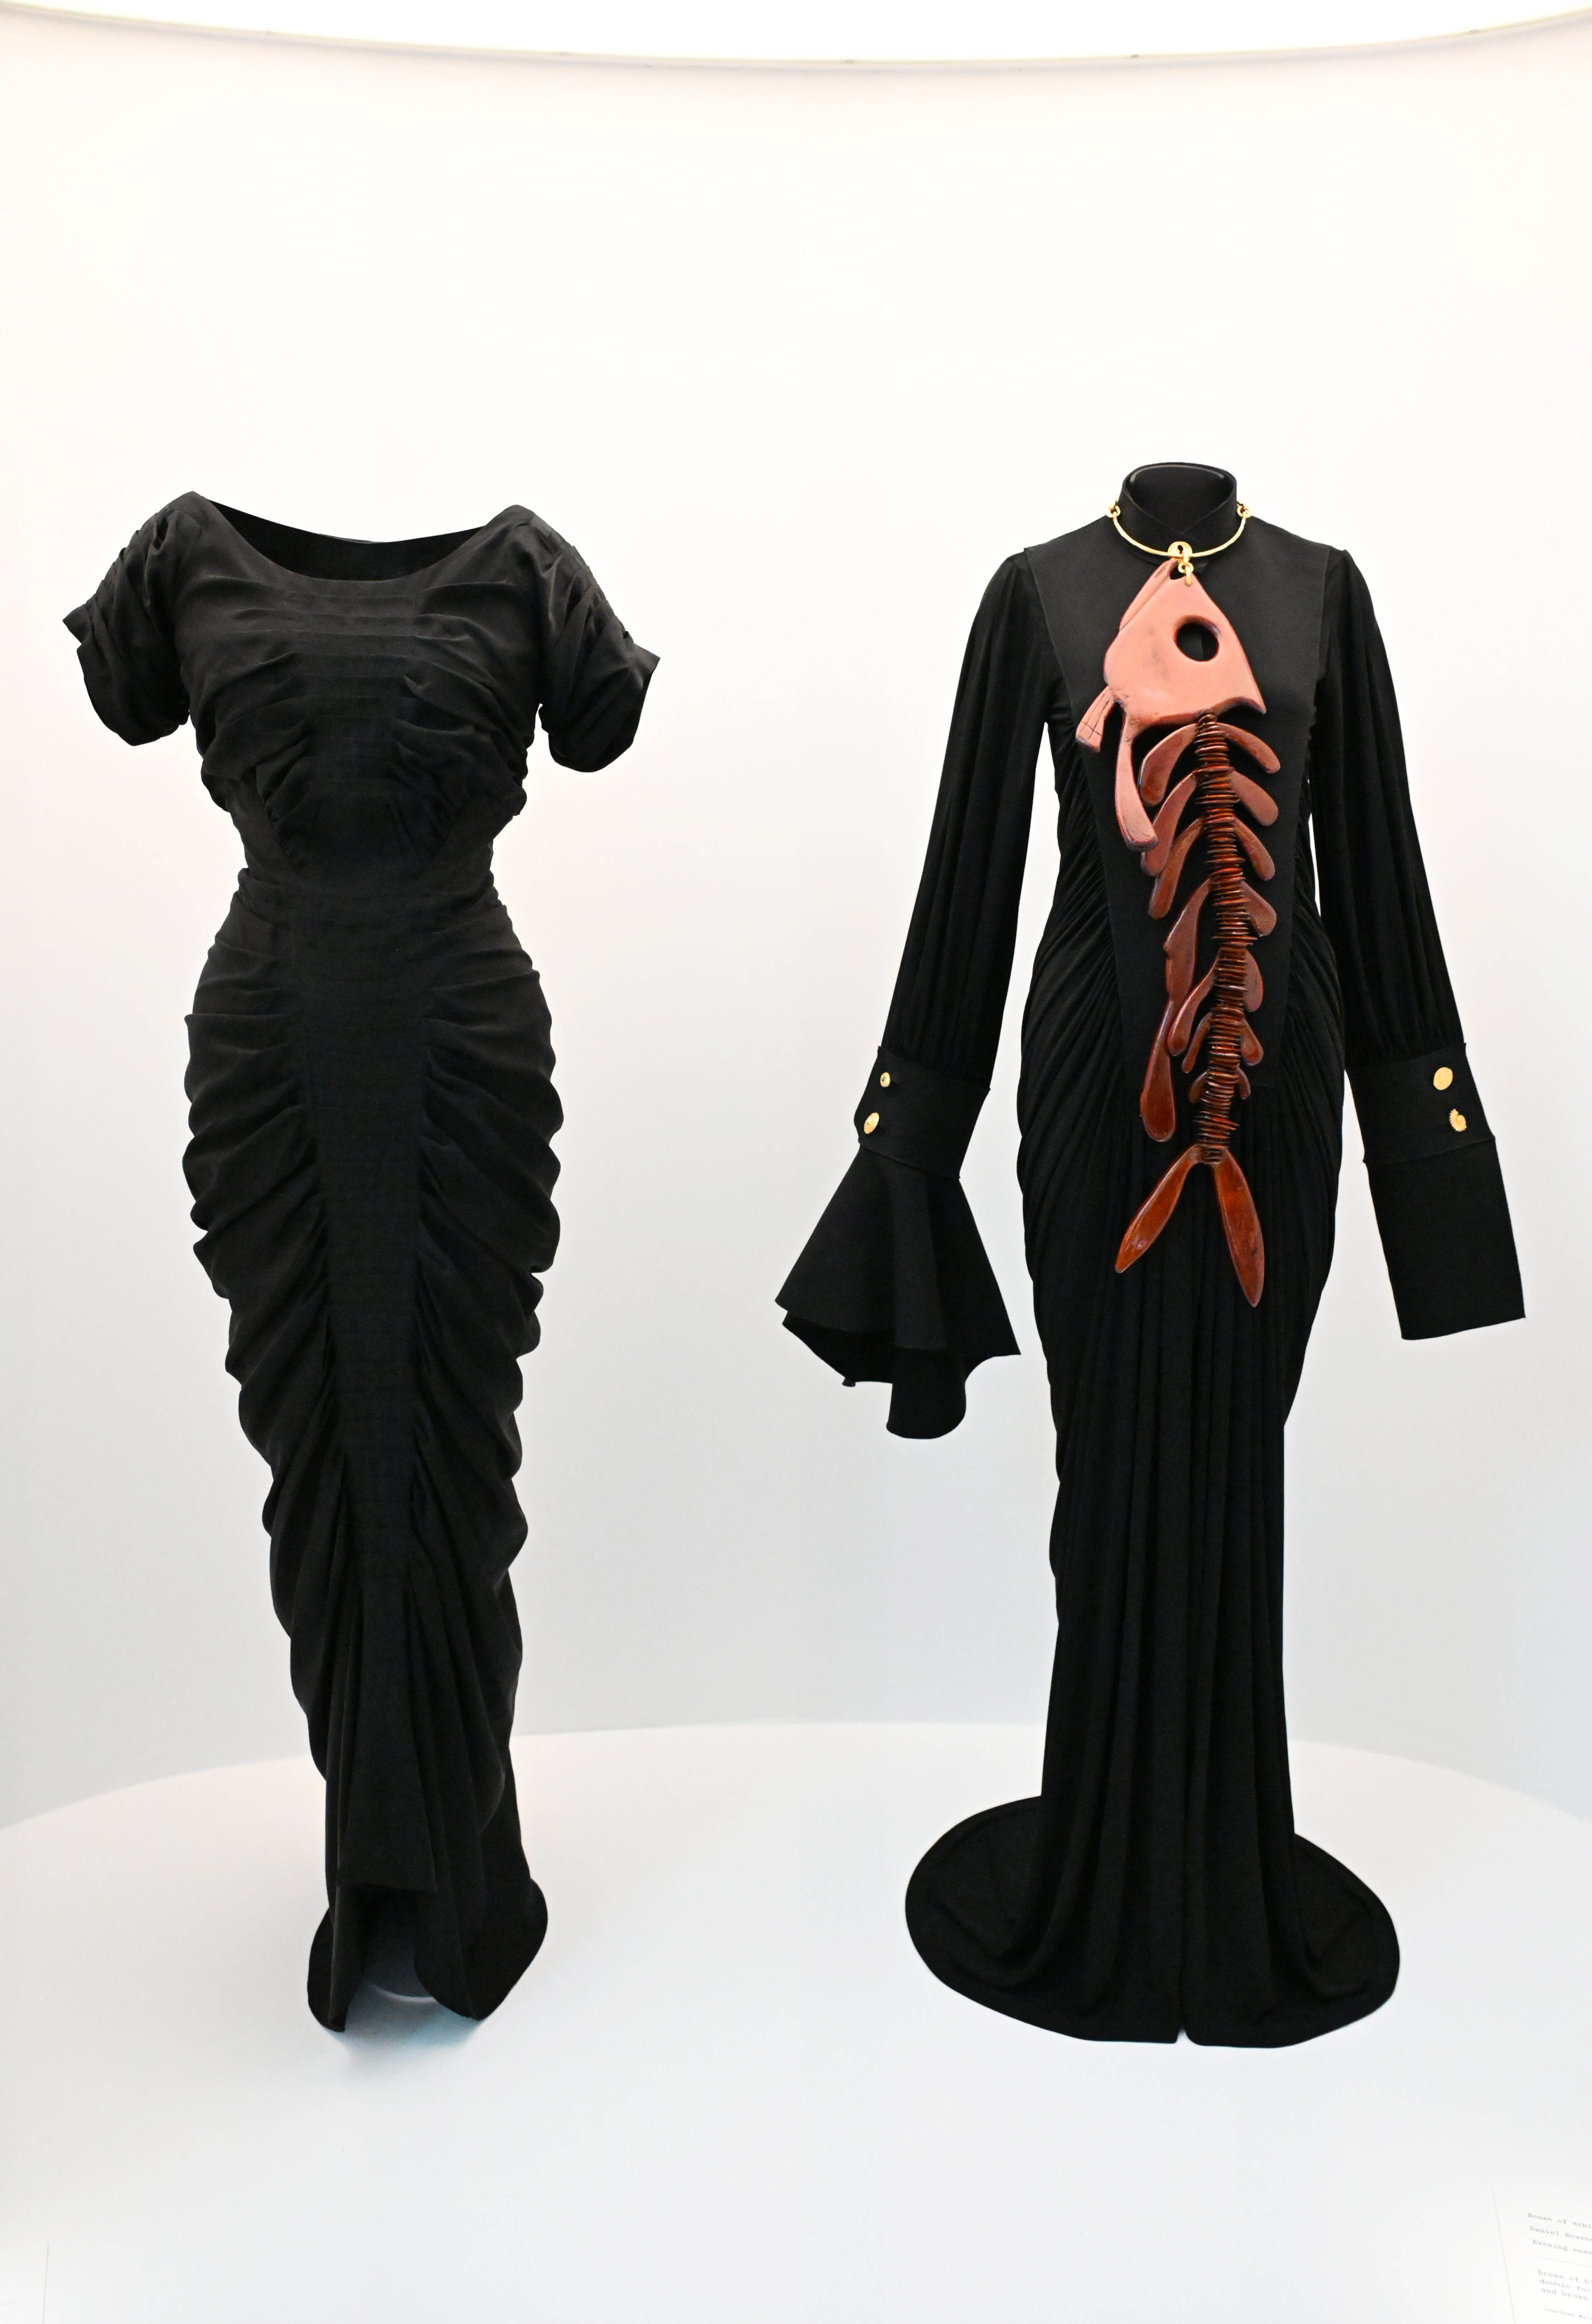 Two elegant vintage dresses on display, one with a ruffled skirt, the other with unique front lacing